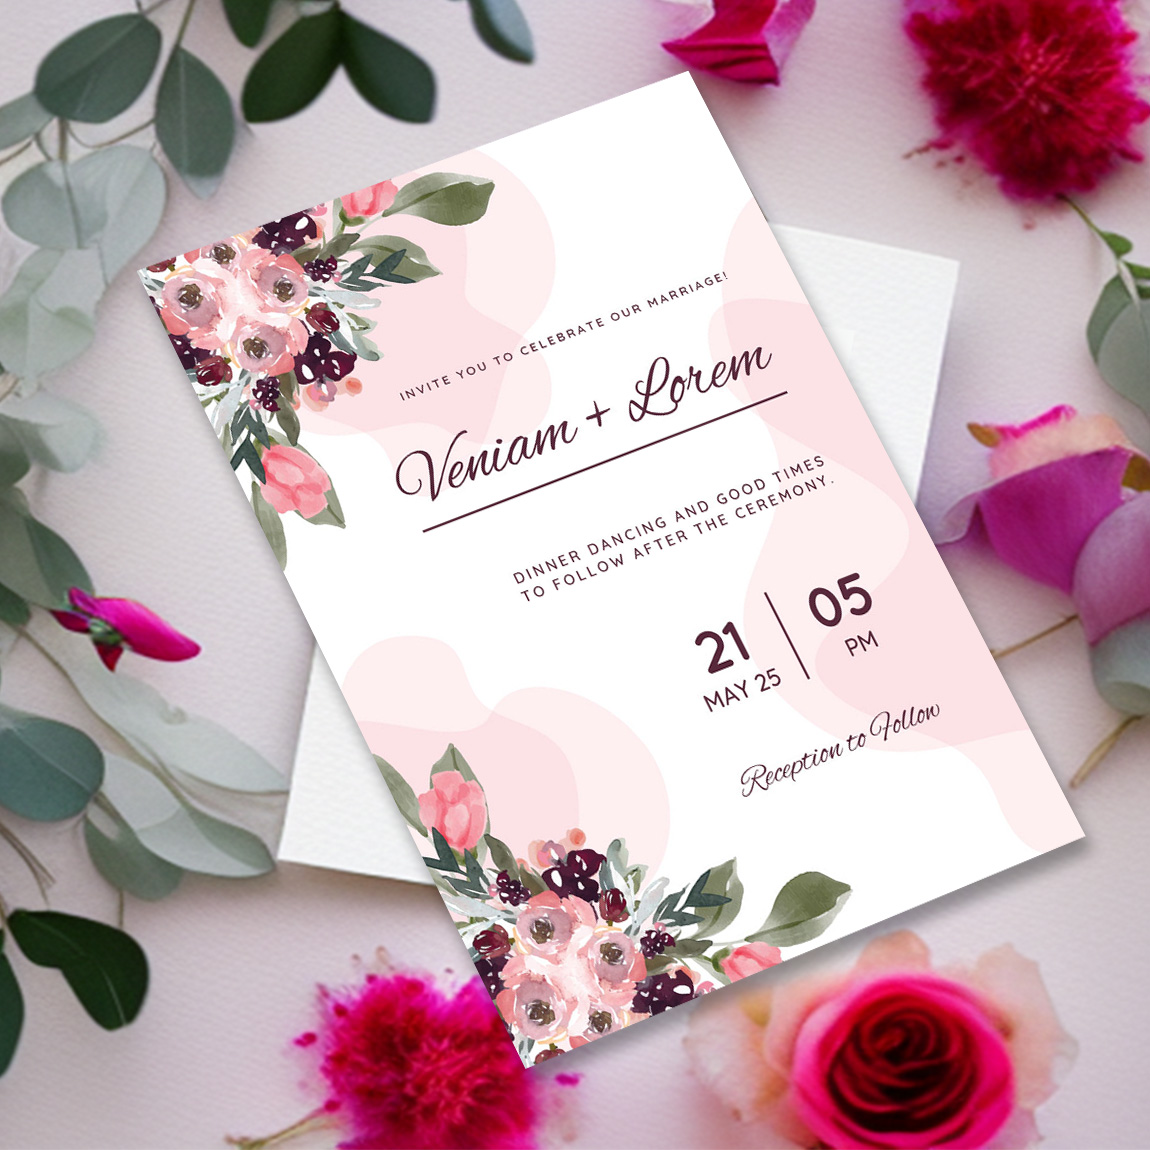 Image of a gorgeous wedding invitation in combination with flowers and leaves.